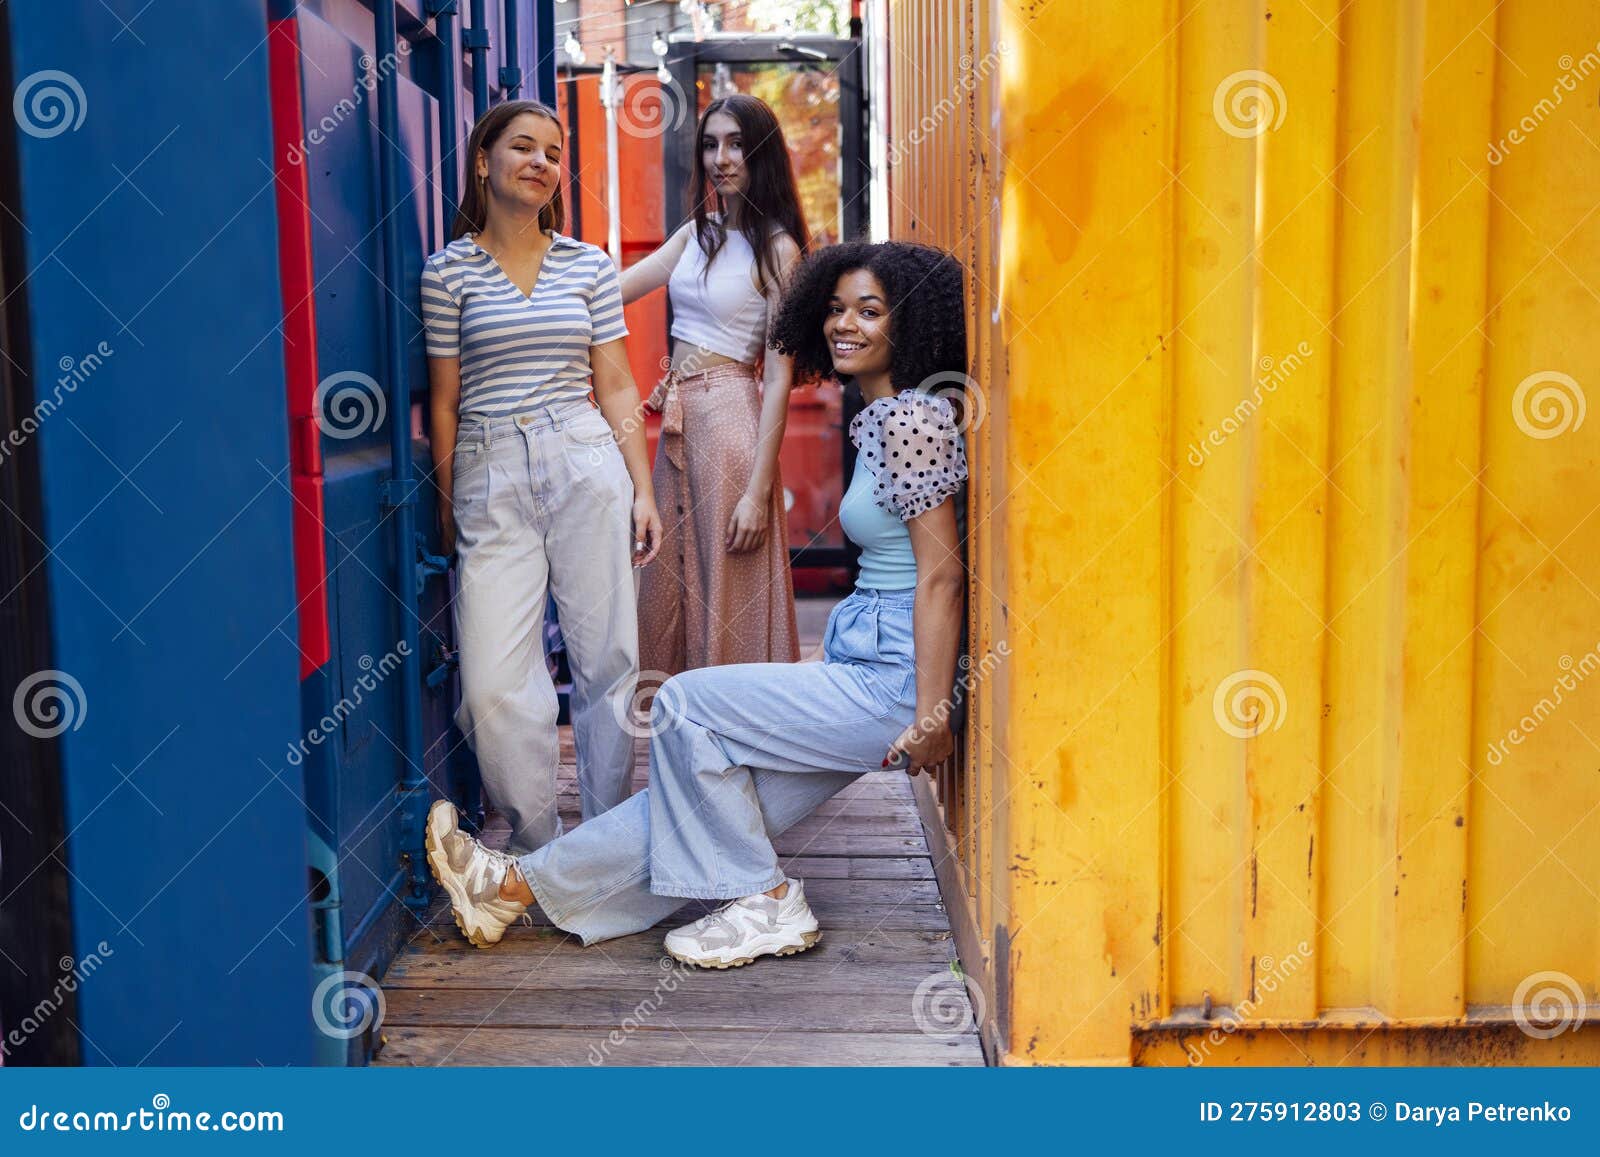 Three Funny Street Style Hipster Girls Posing At White Brick Wall